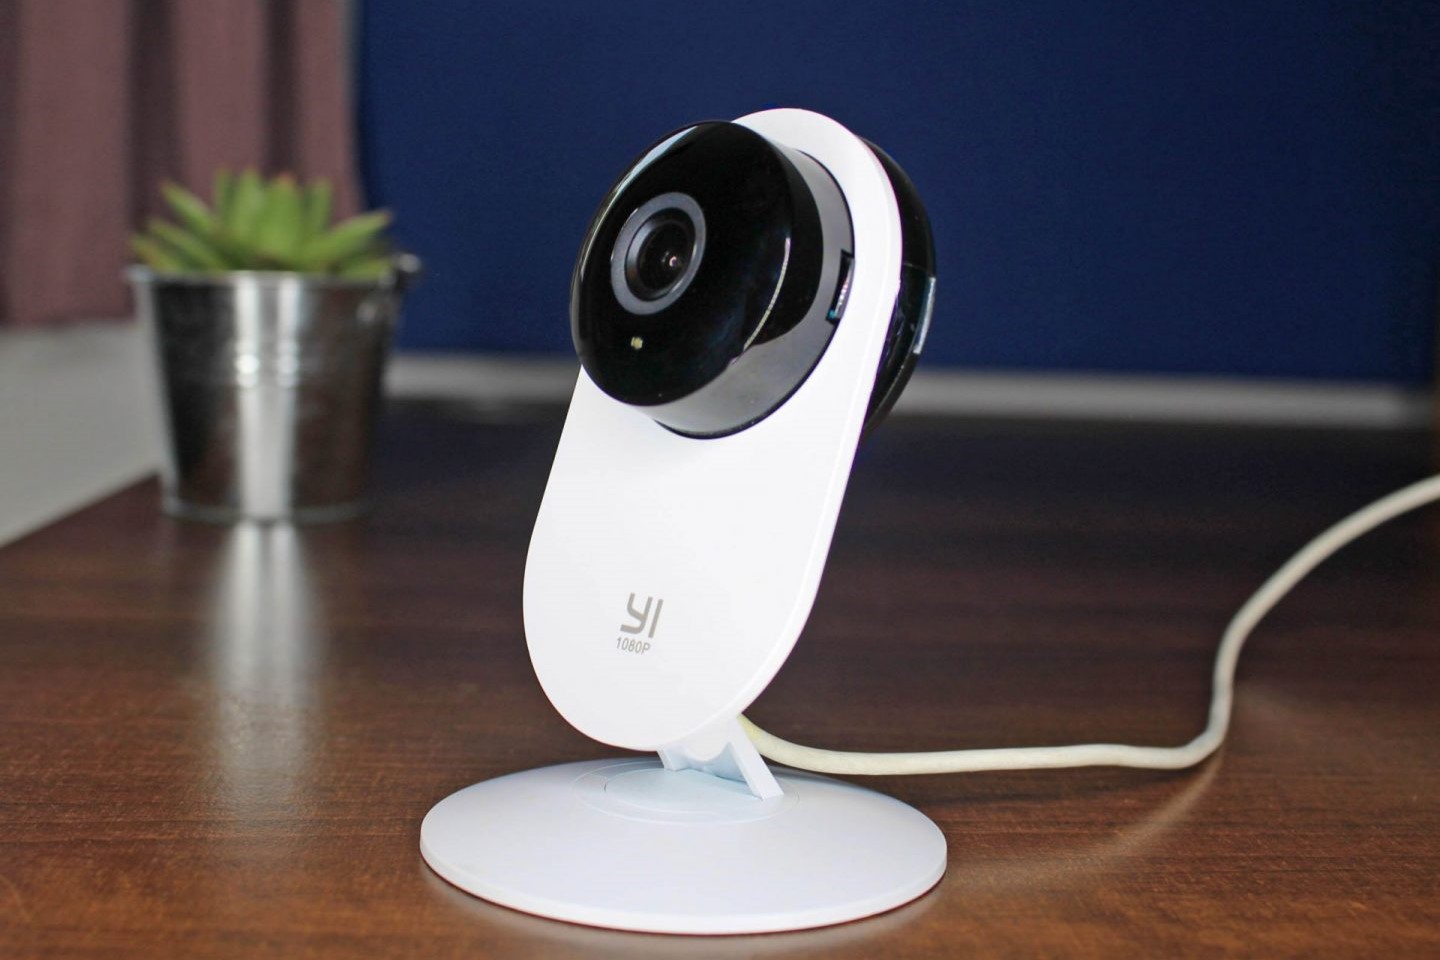 Troubleshooting Issues With Xiaomi Yi Security Camera